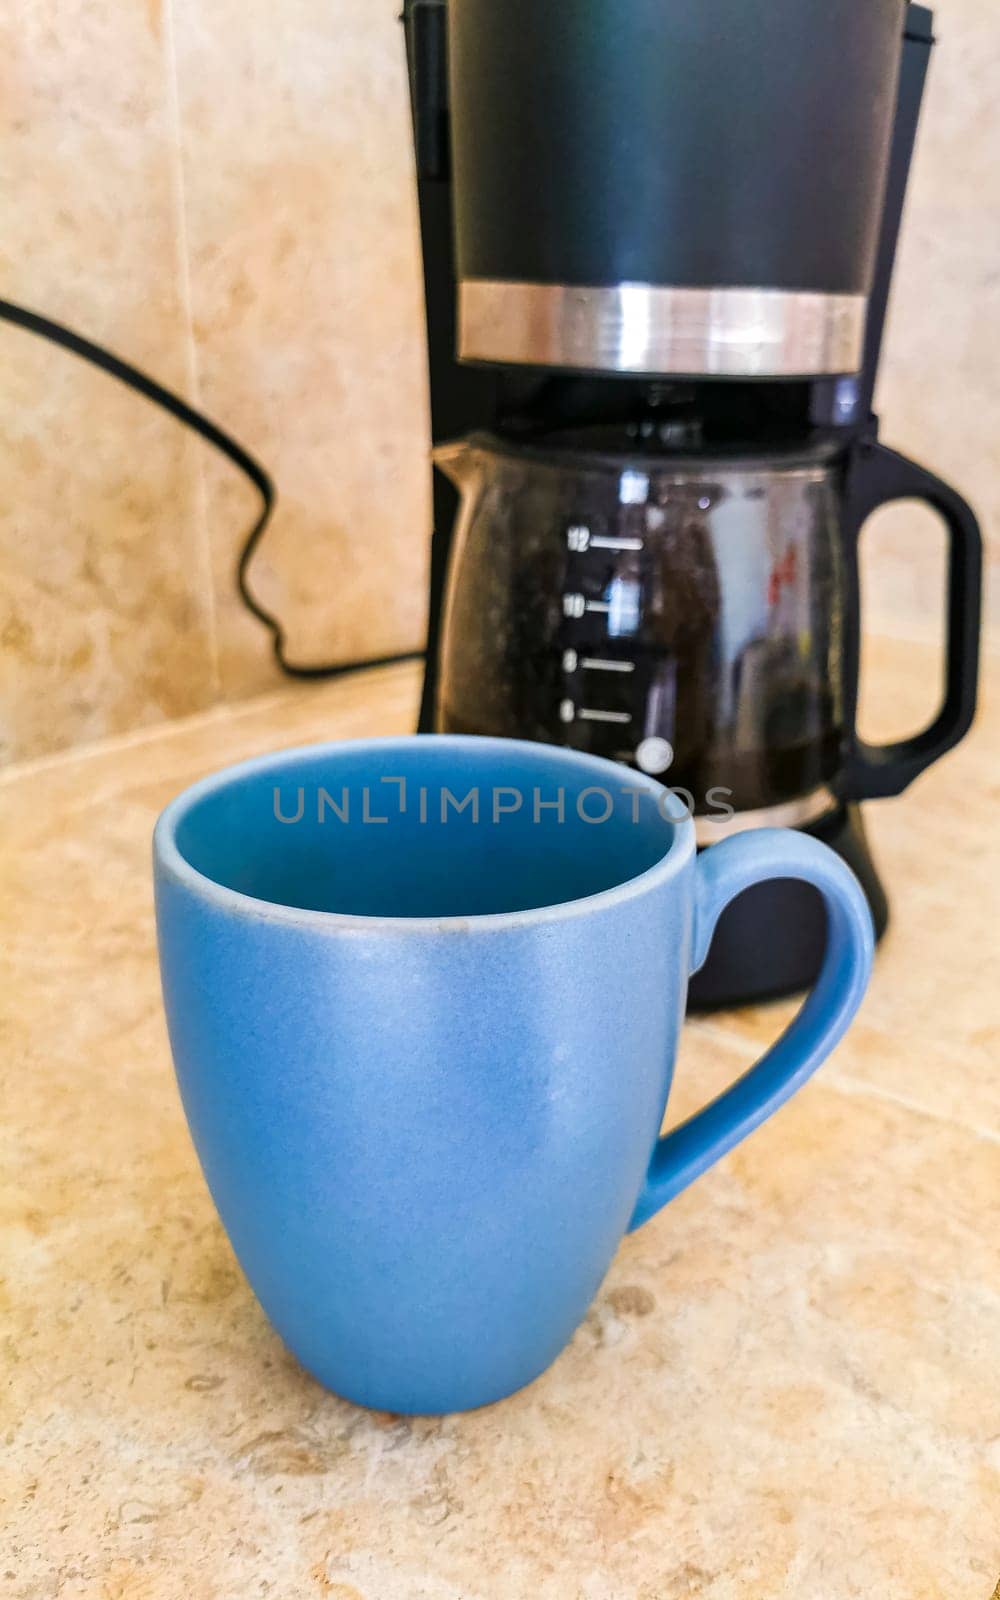 Blue coffee cup and black coffee maker from Mexico. by Arkadij